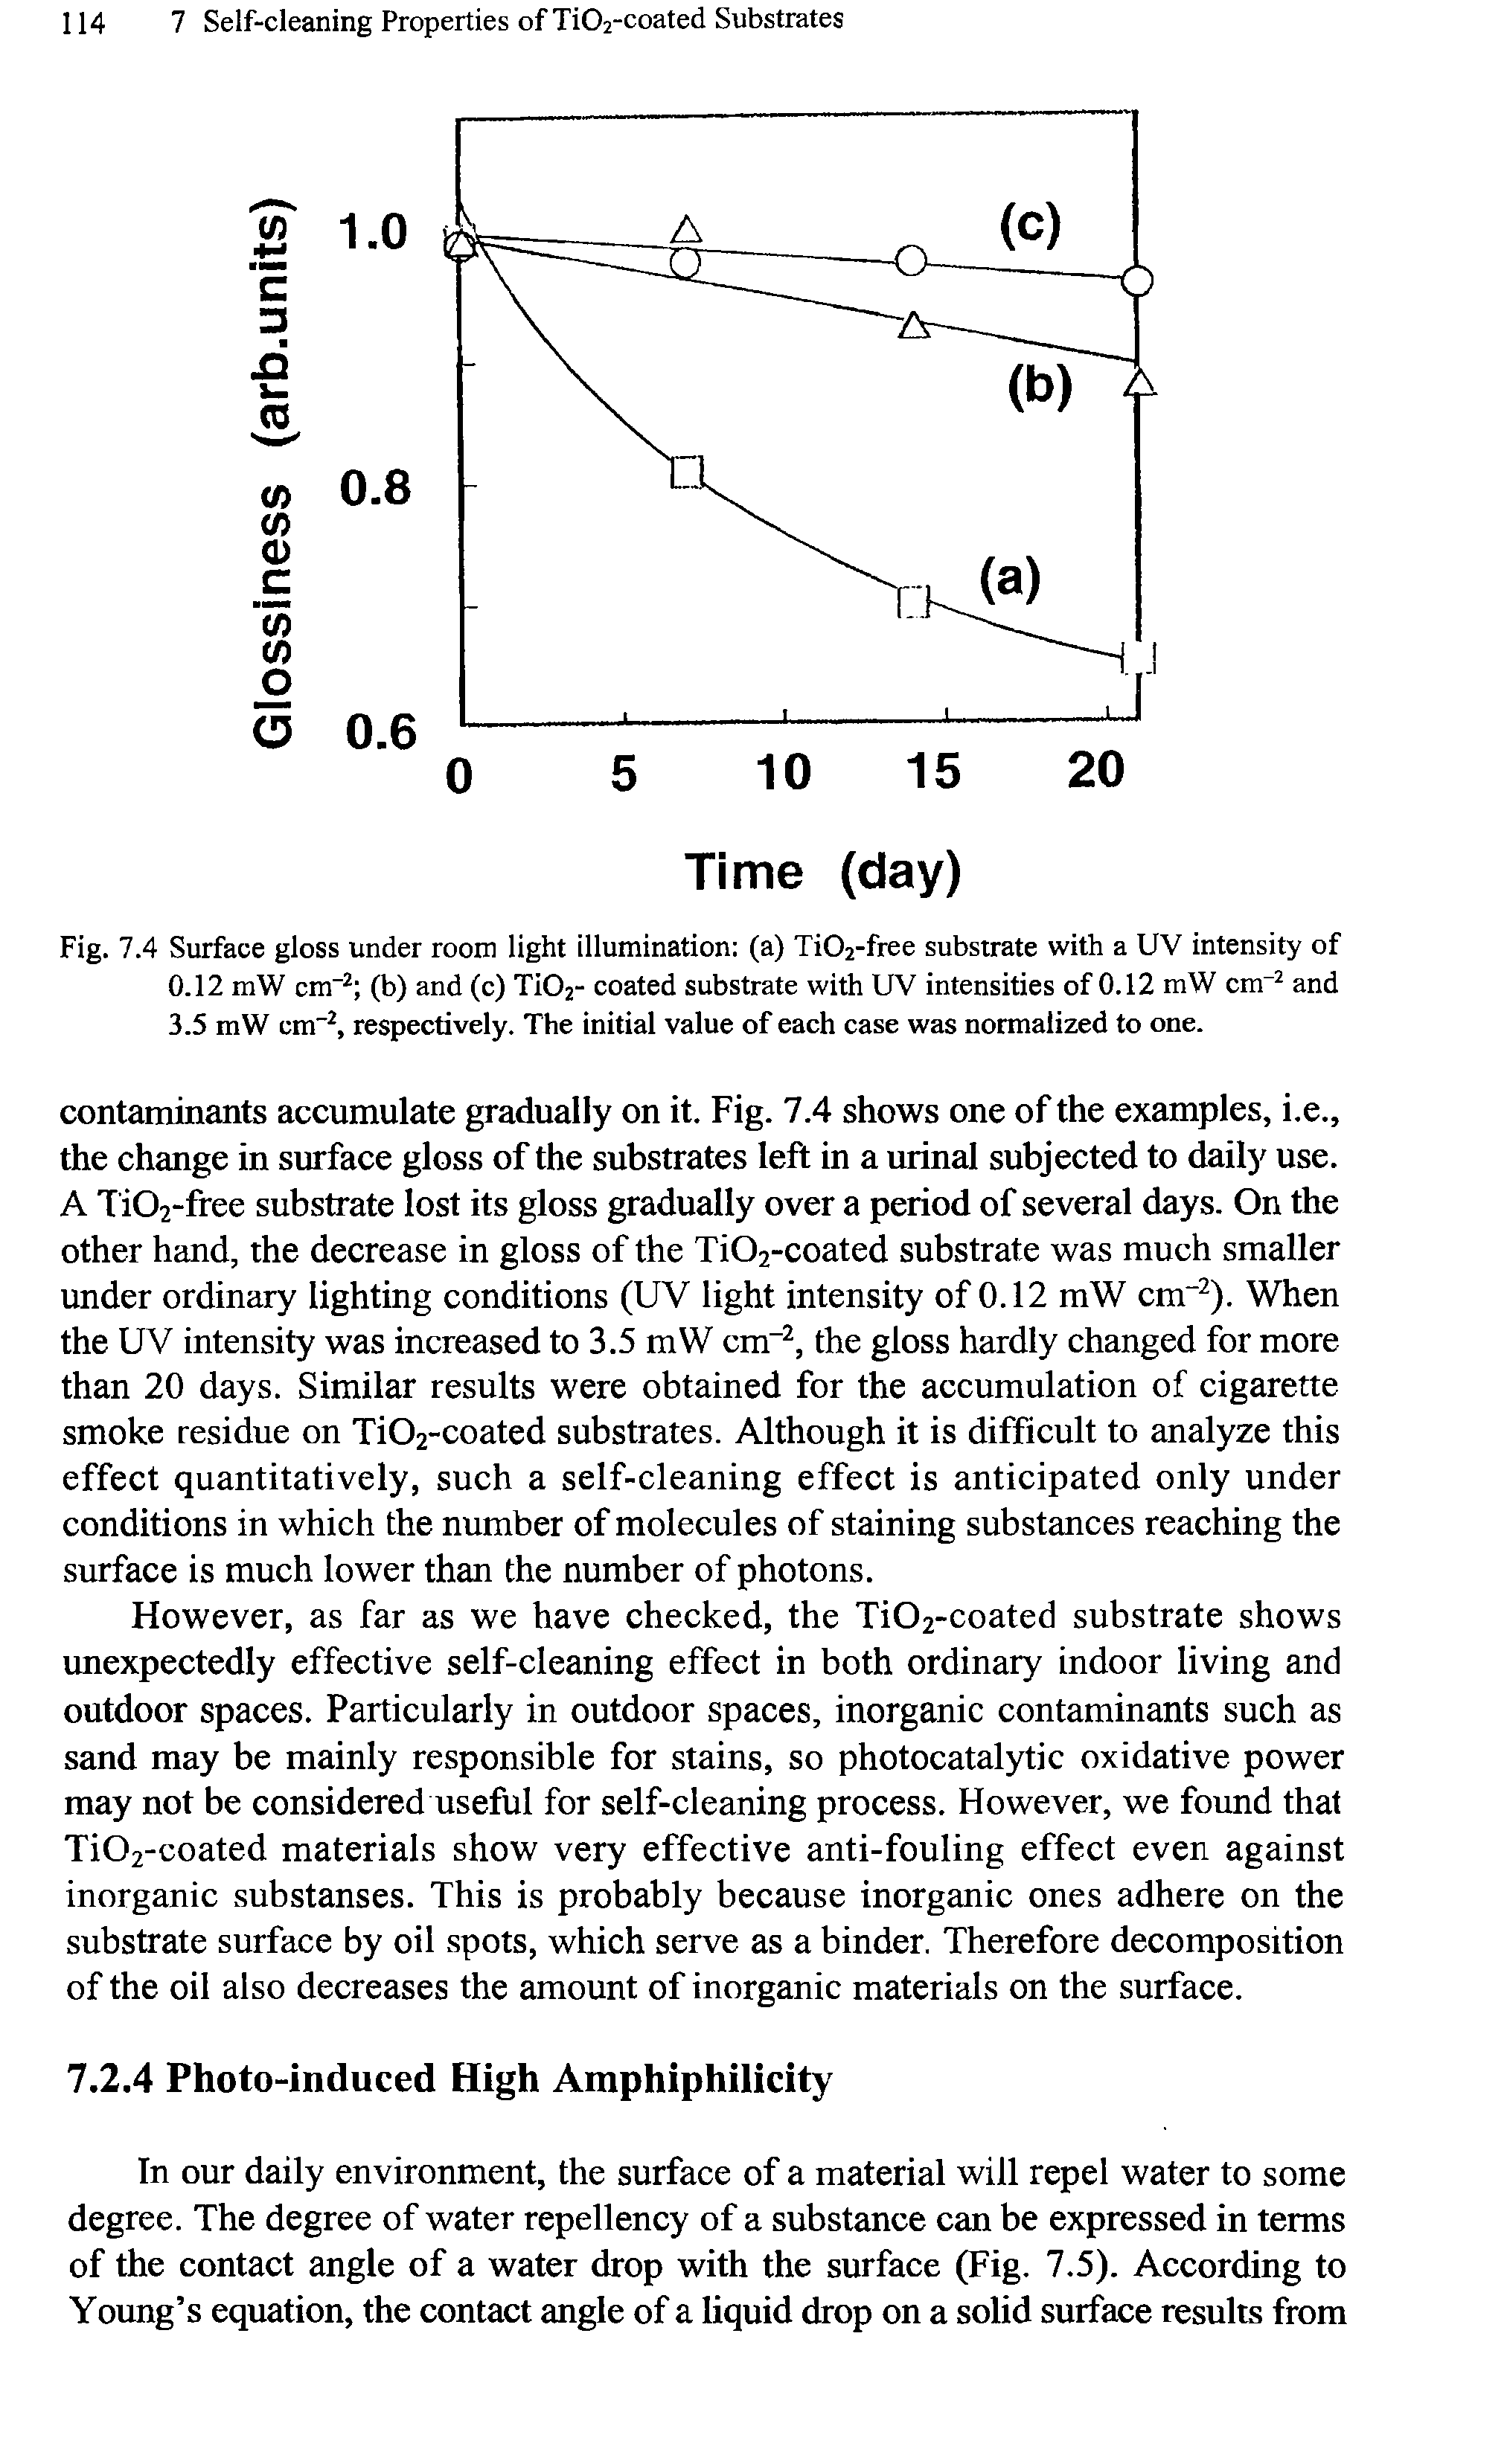 Fig. 7.4 Surface gloss under room light illumination (a) Ti02-free substrate with a UV intensity of 0.12 mW cm-2 (b) and (c) Ti02- coated substrate with UV intensities of 0.12 mW cm-2 and 3.5 mW cm-2, respectively. The initial value of each case was normalized to one.